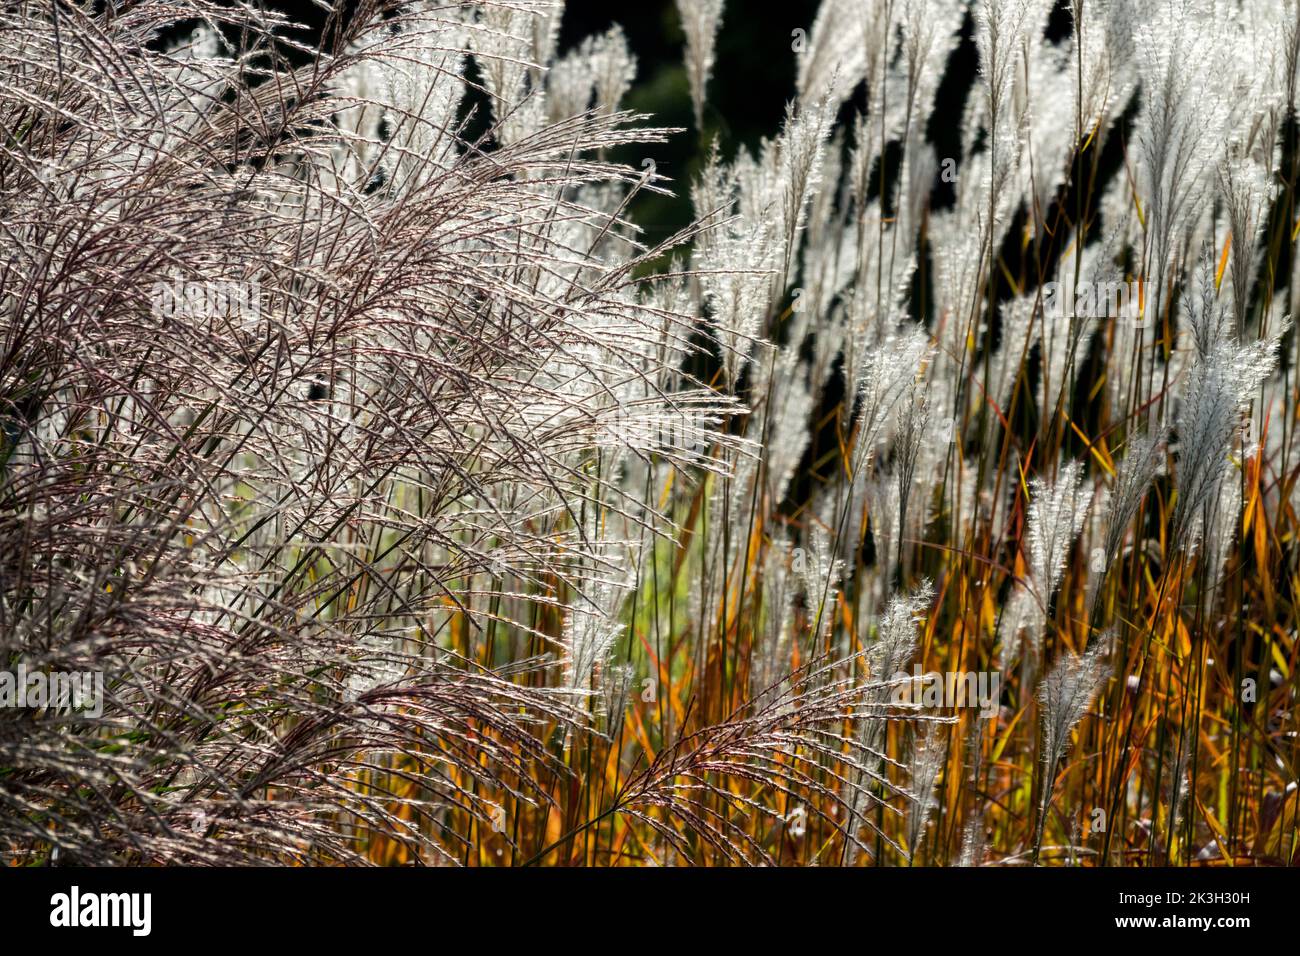 Feathery seed-heads, Sunlight, Flame Grass, Miscanthus sinensis, Eulalia, Seed heads, Shining, Panicles, Seedheads Stock Photo